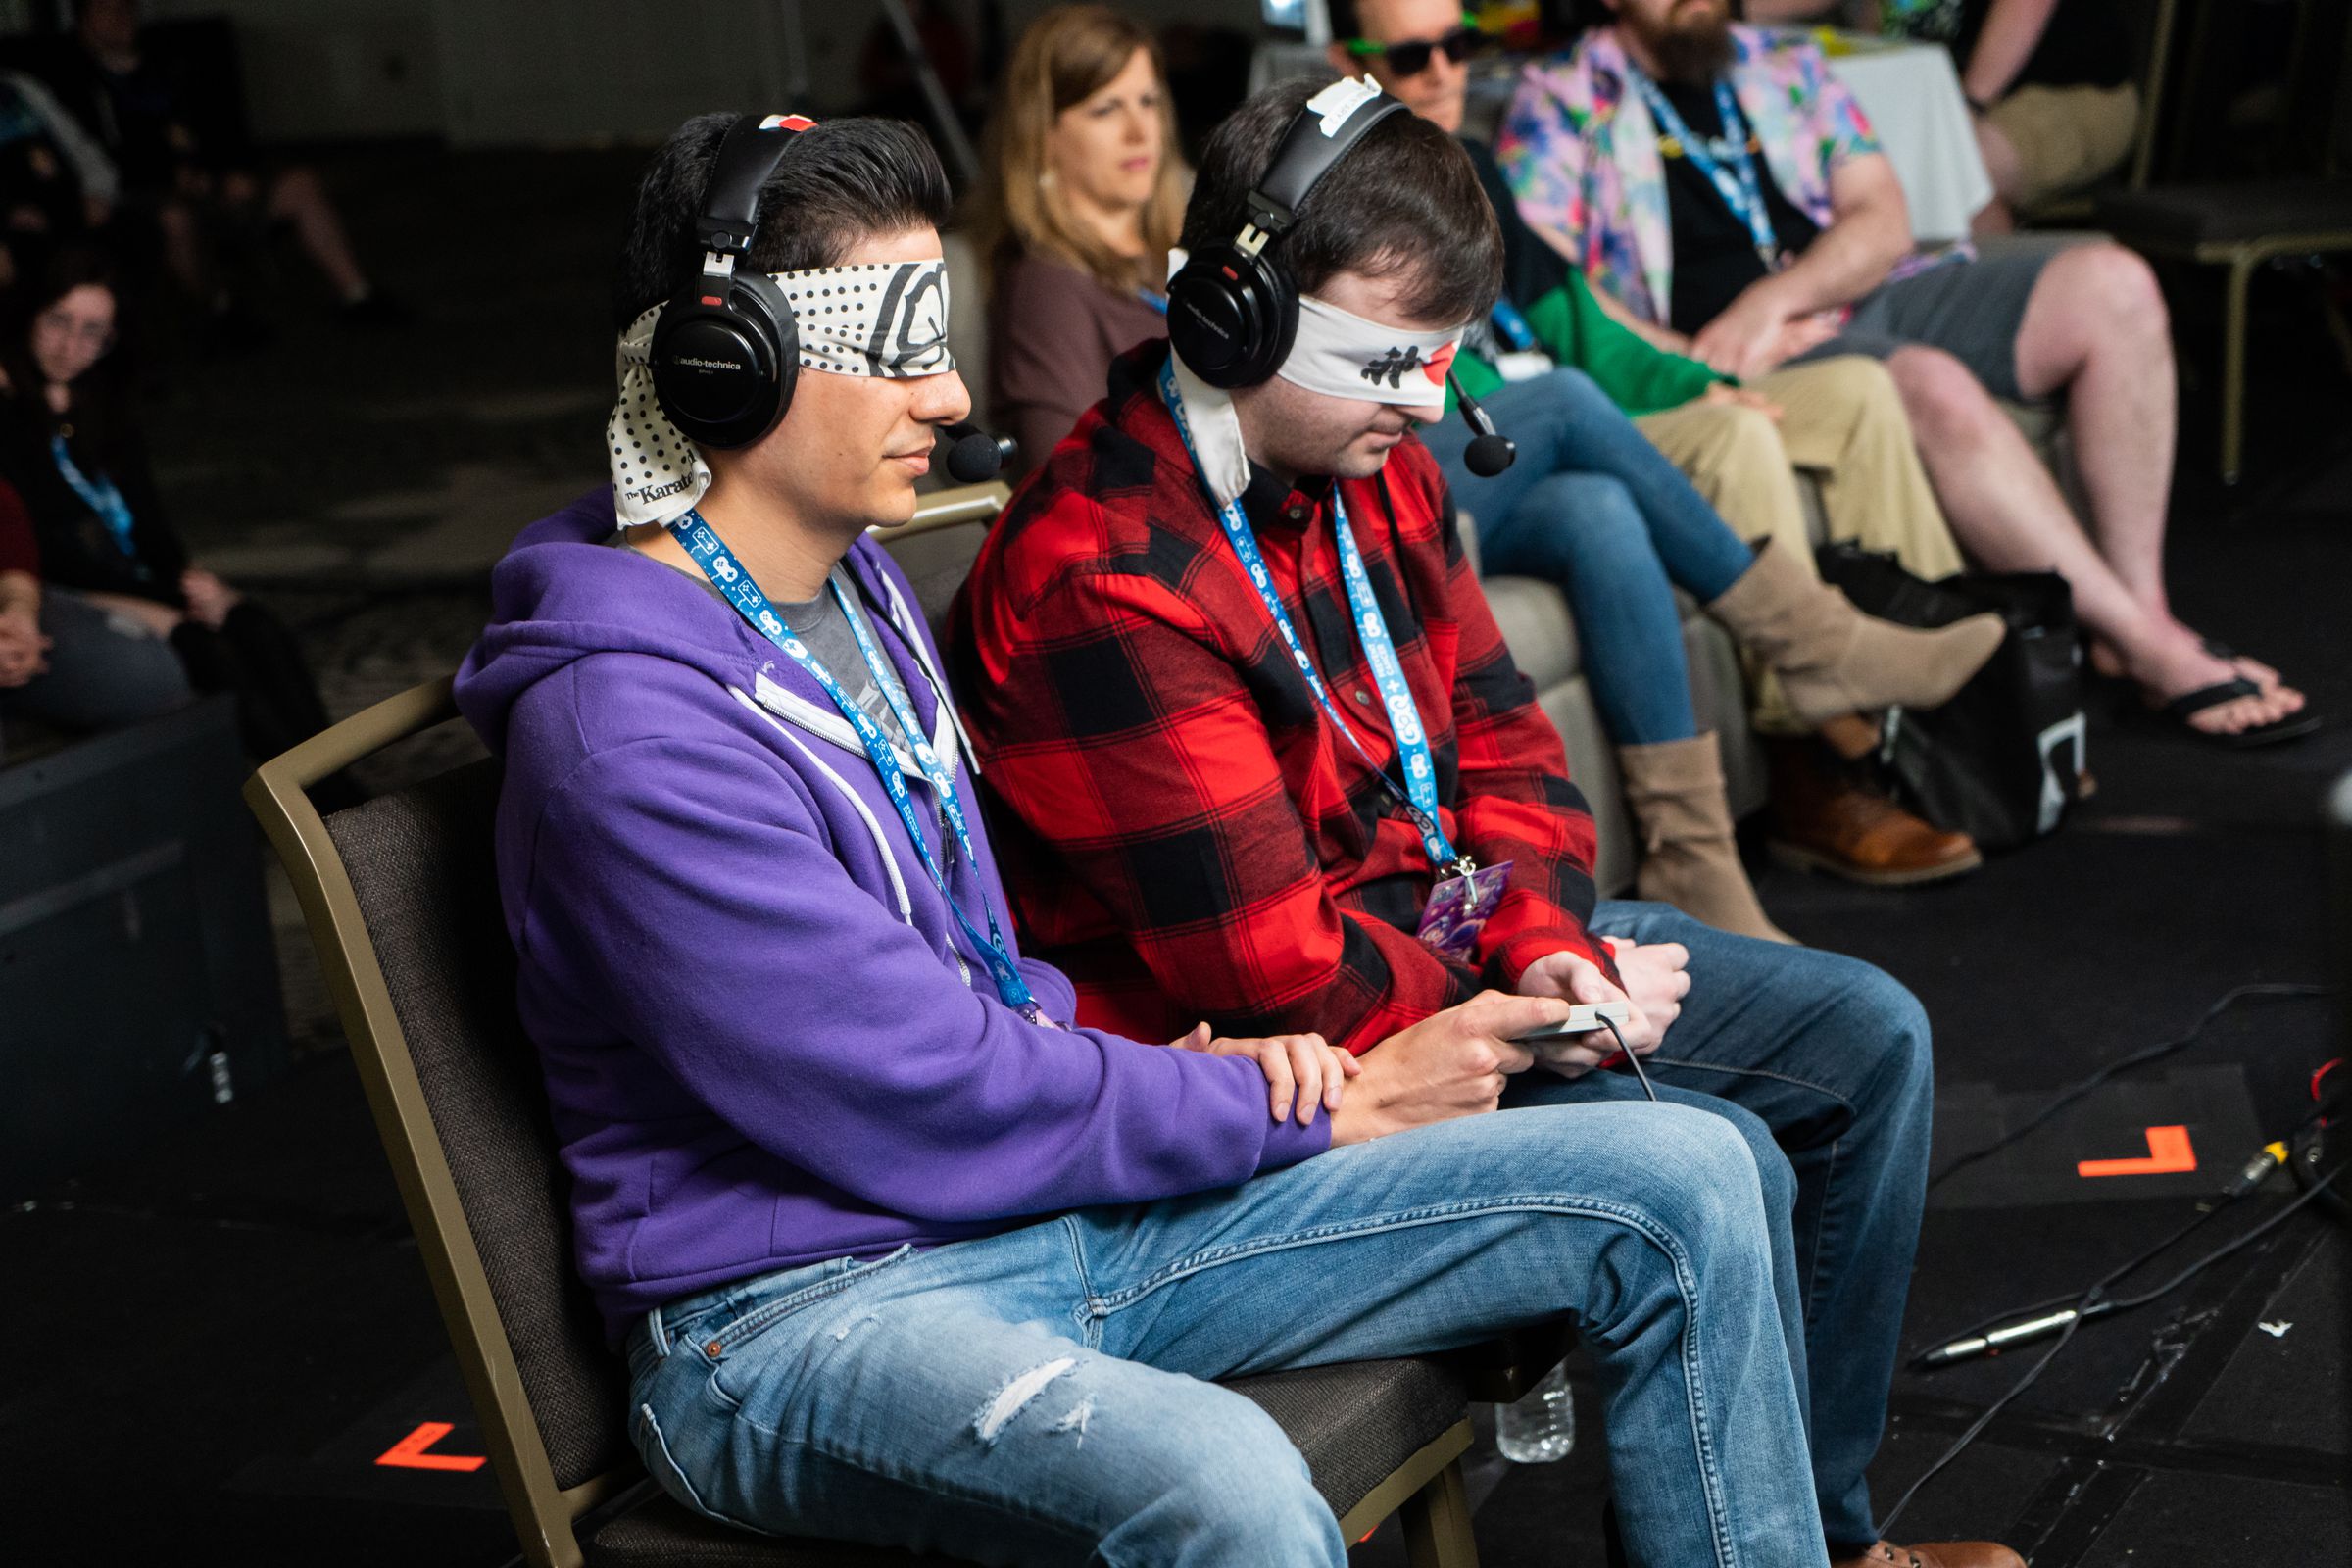 Two blindfolded players tackle a game together at AGDQ 2020.